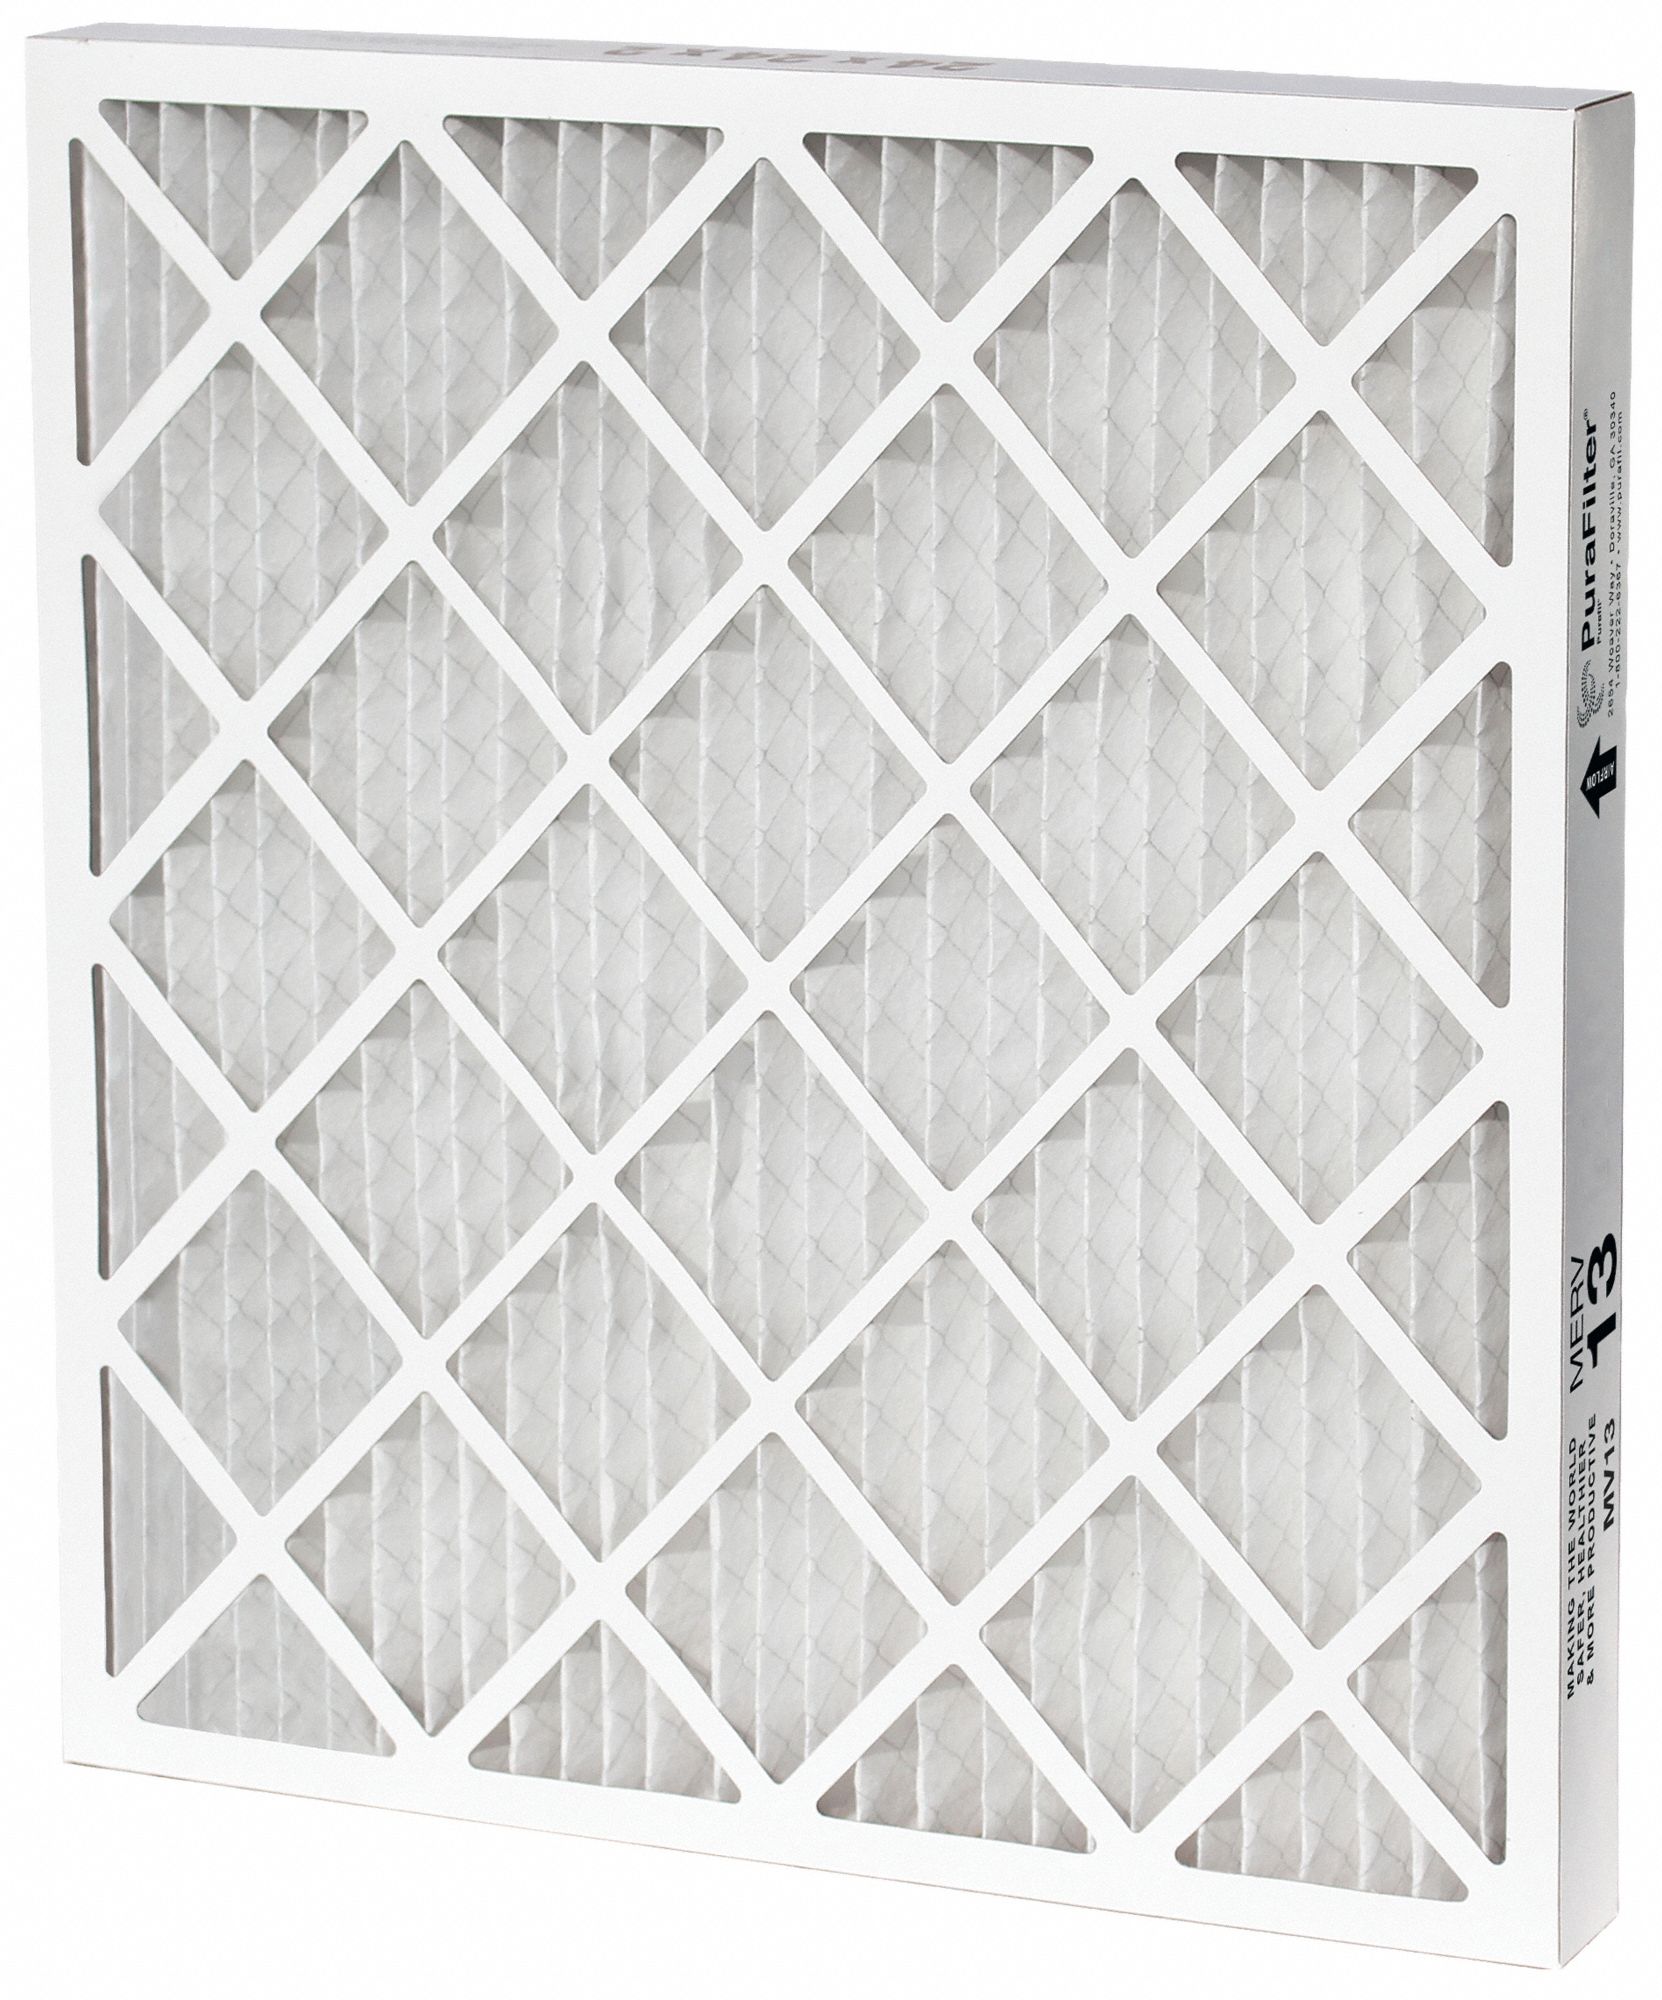 Pleated Air Filter: 20x20x2 Nominal Filter Size, High Capacity, Synthetic, Beverage Board